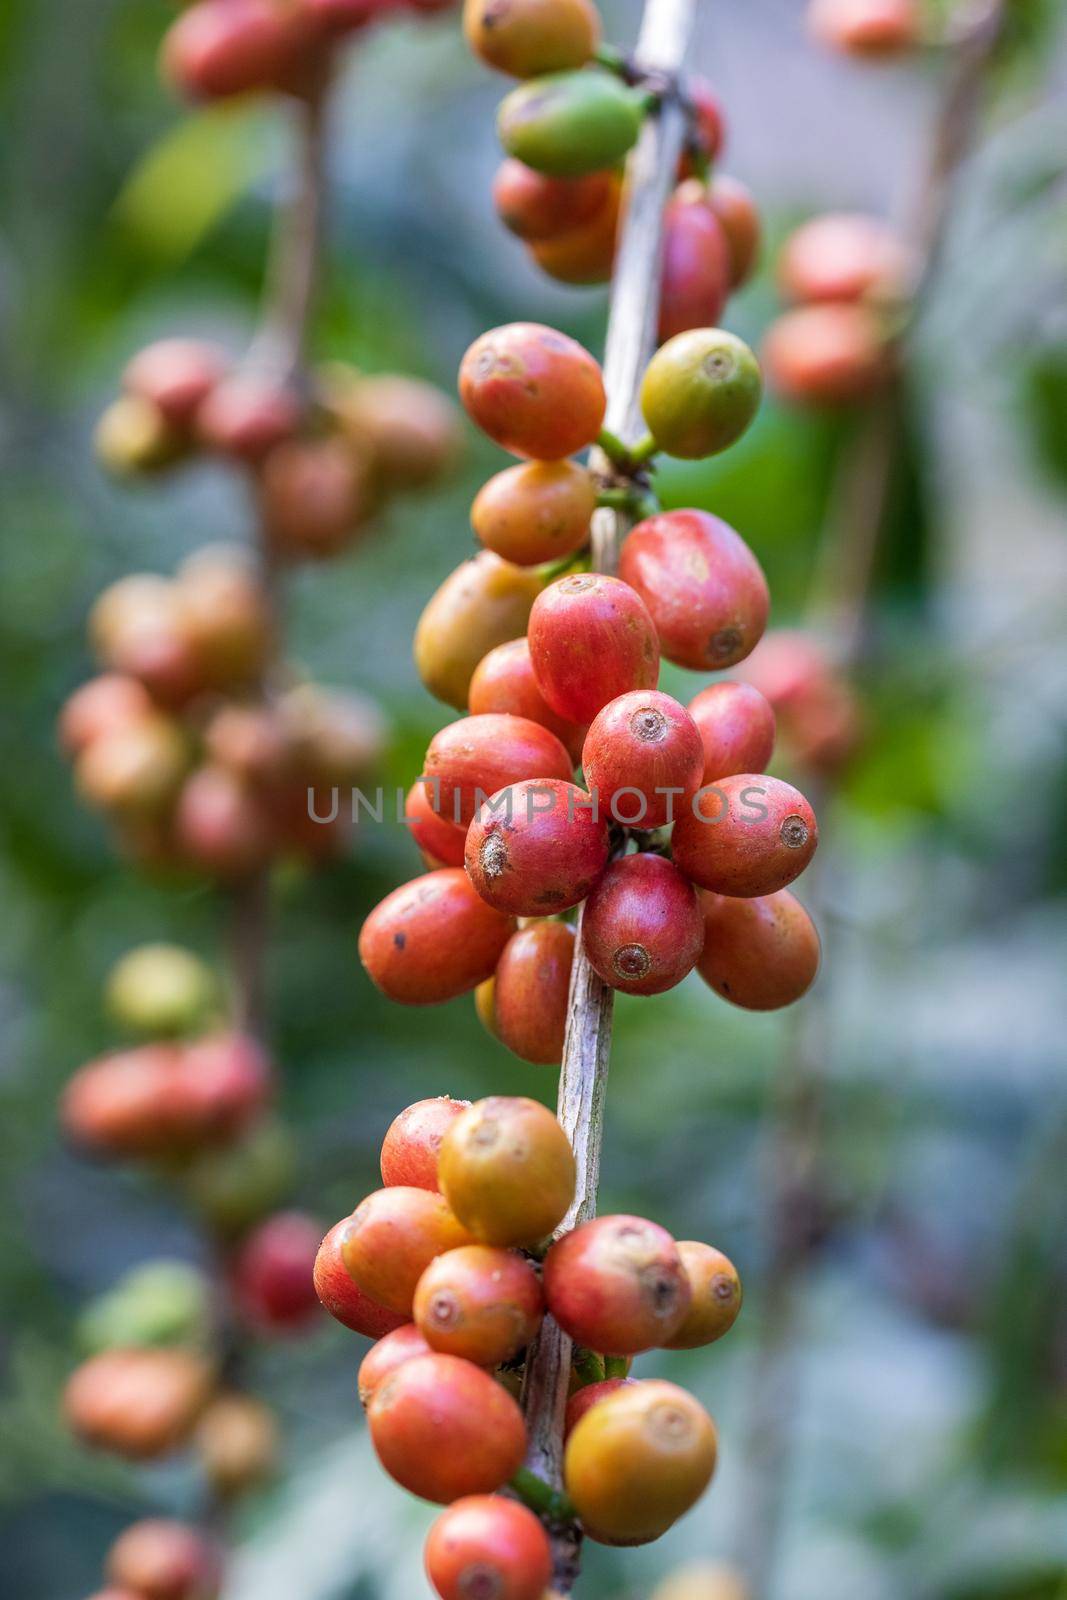 Arabicas coffee beans ripening on tree in North of thailand by toa55